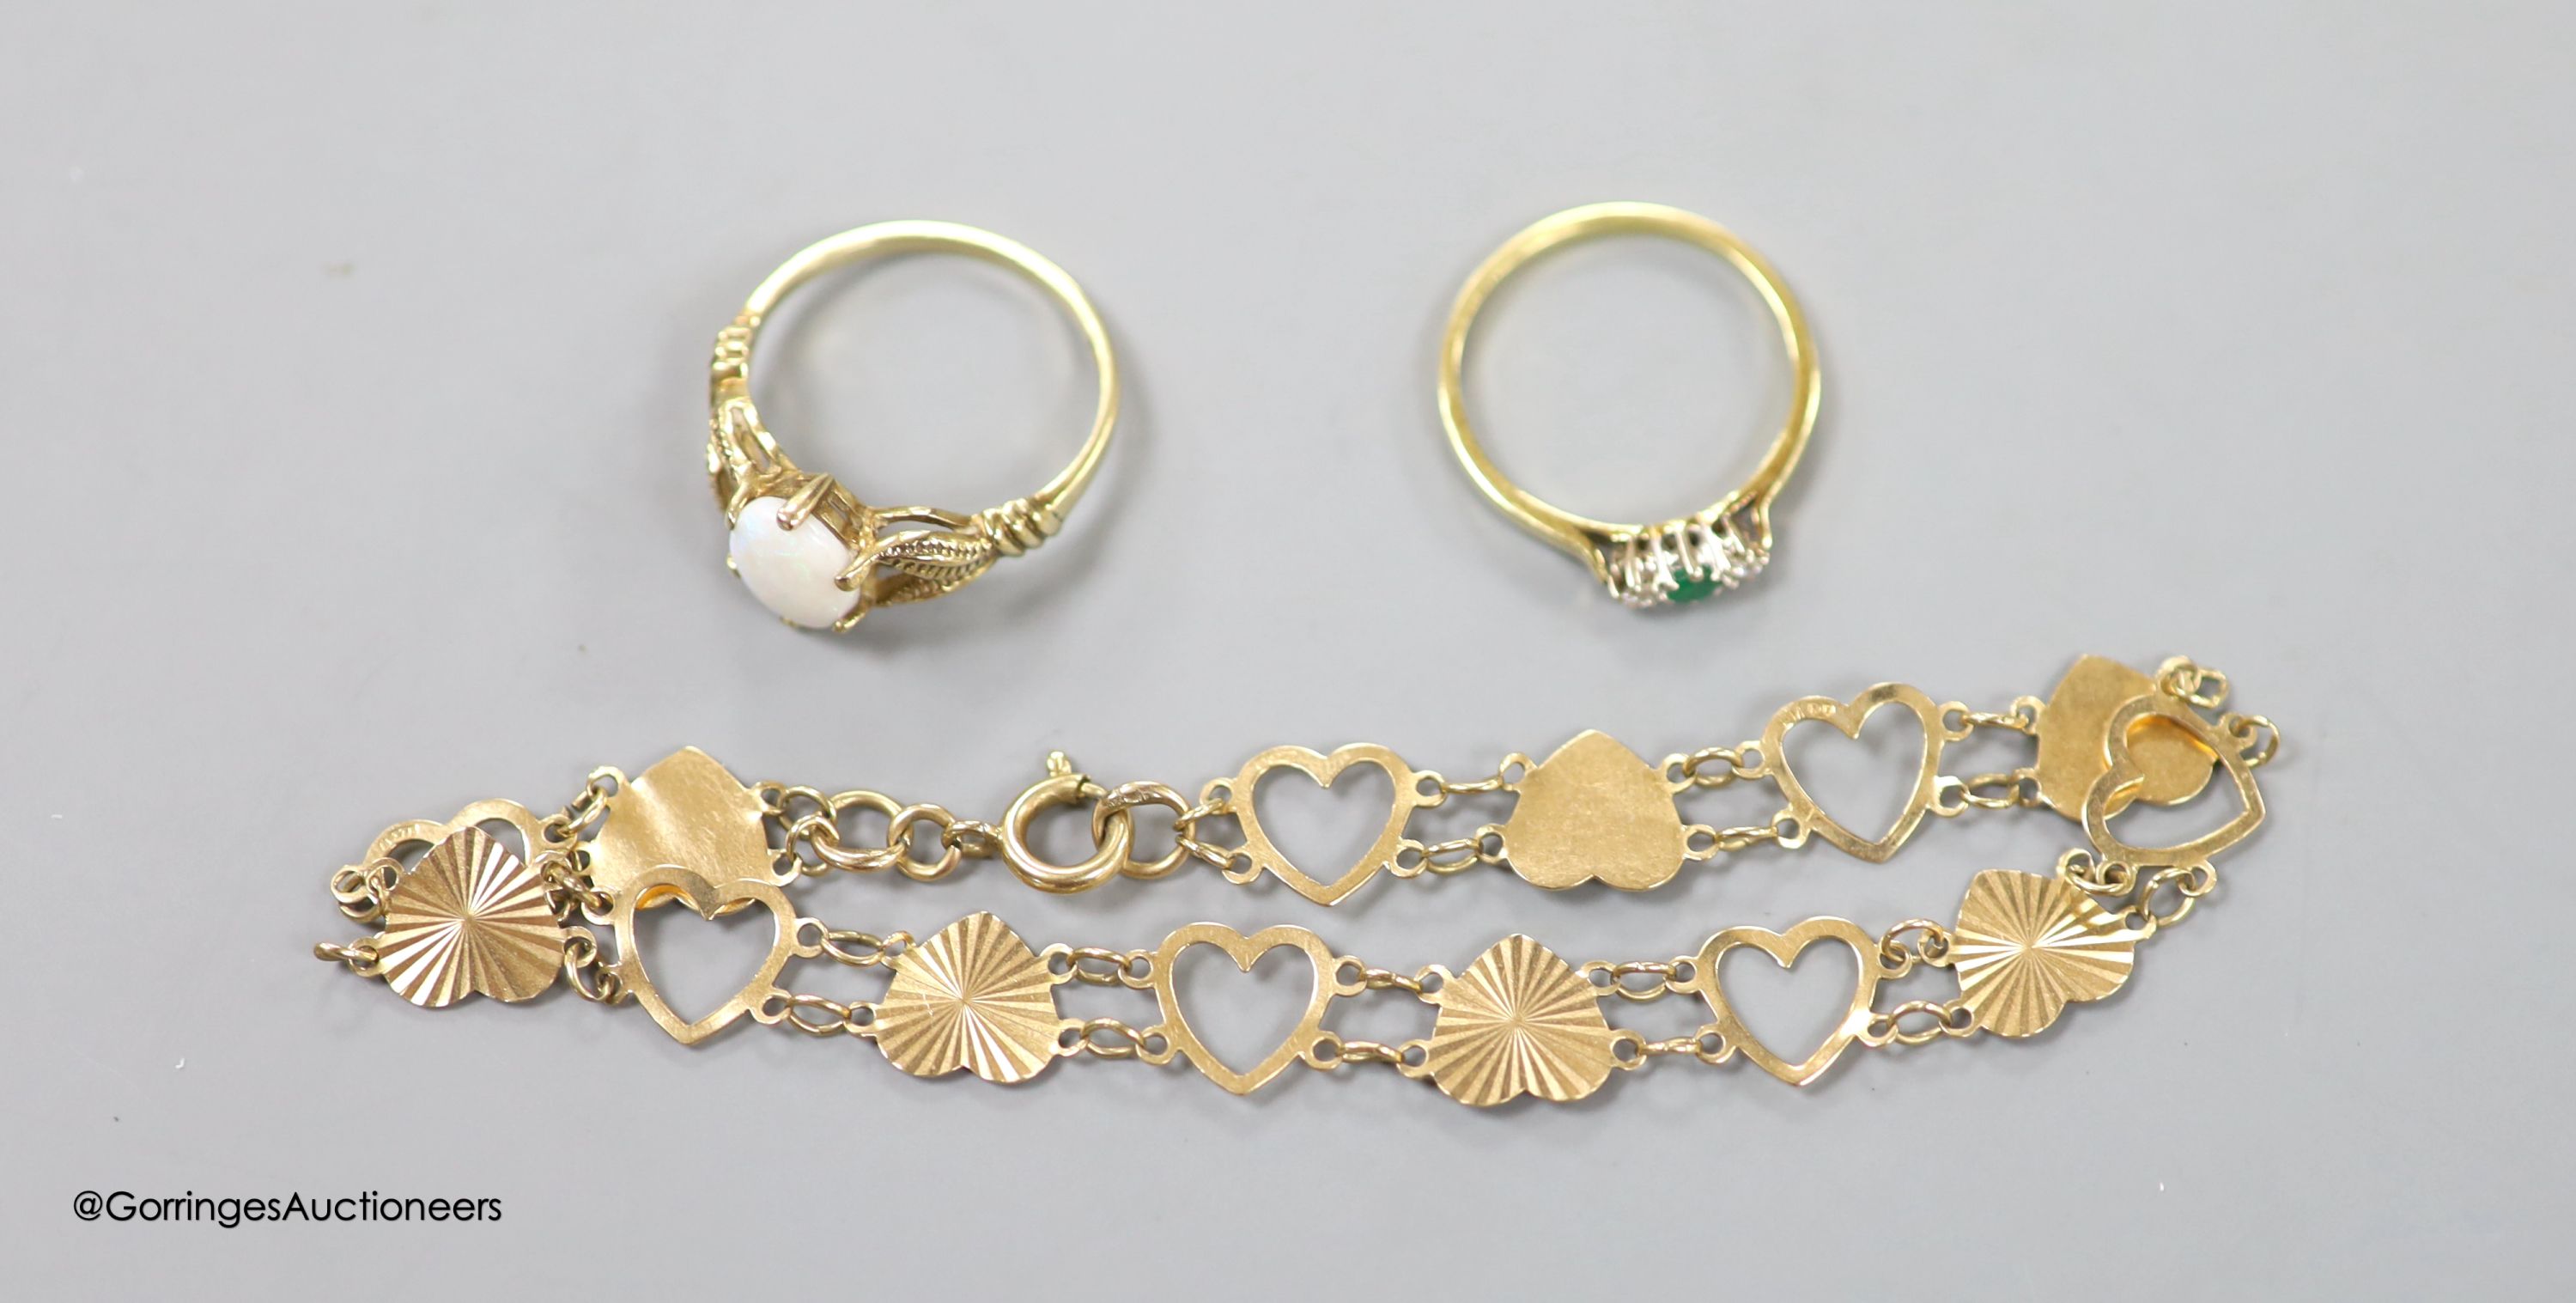 An 18ct gold, emerald and diamond three-stone ring, size M, gross 1.9 grams, a 9ct gold and opal ring and a 9ct gold 'heart' bracelet, gross 5.9 grams.